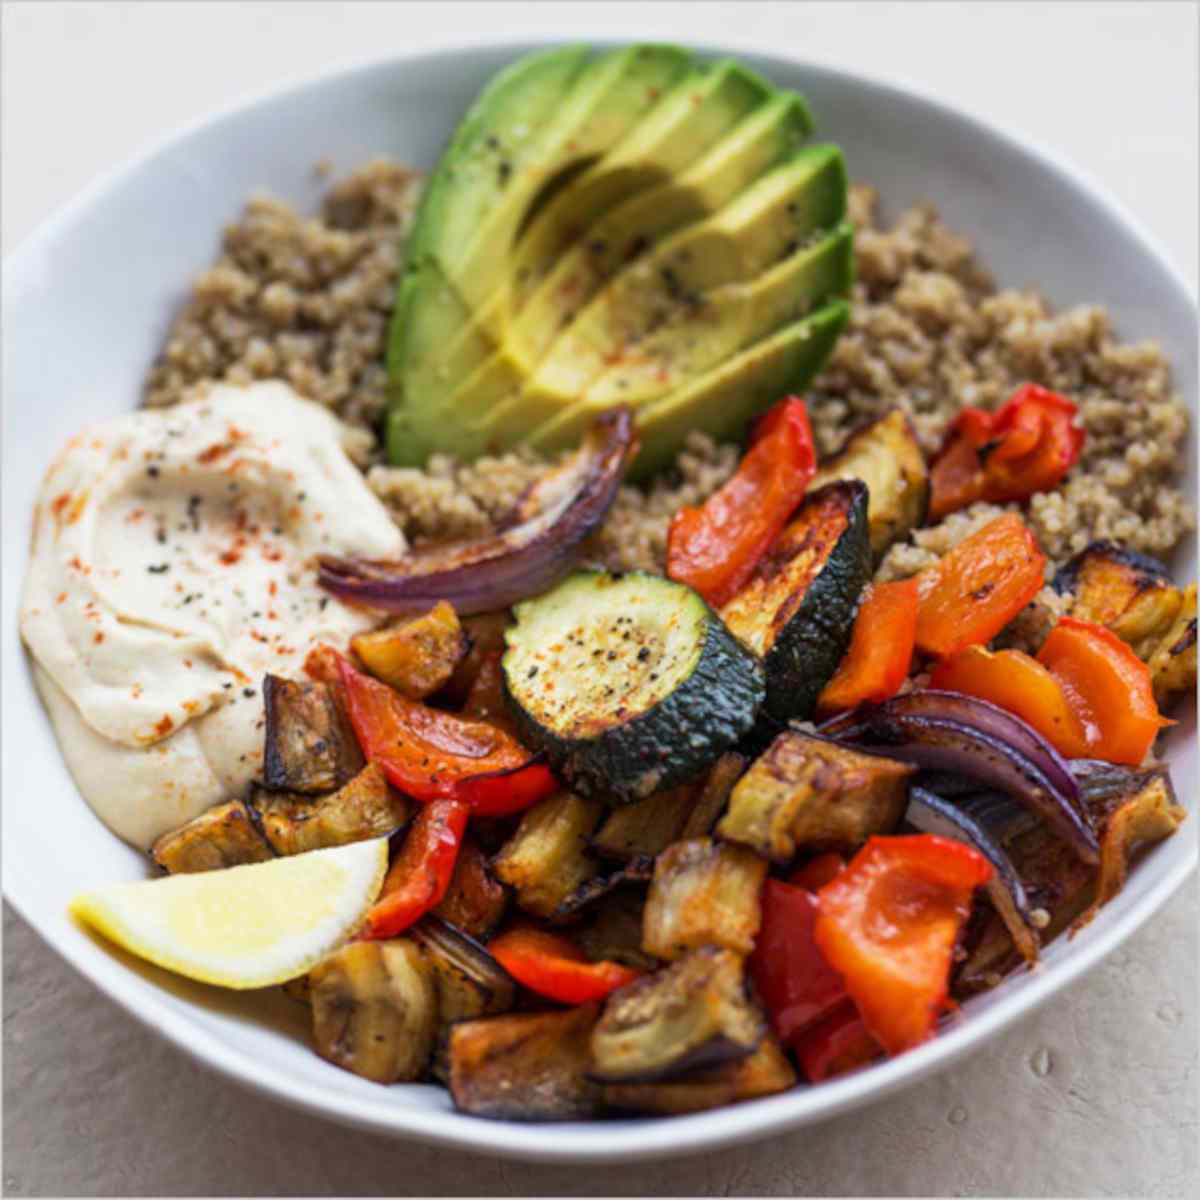 Roasted vegetables and avocado in a bowl